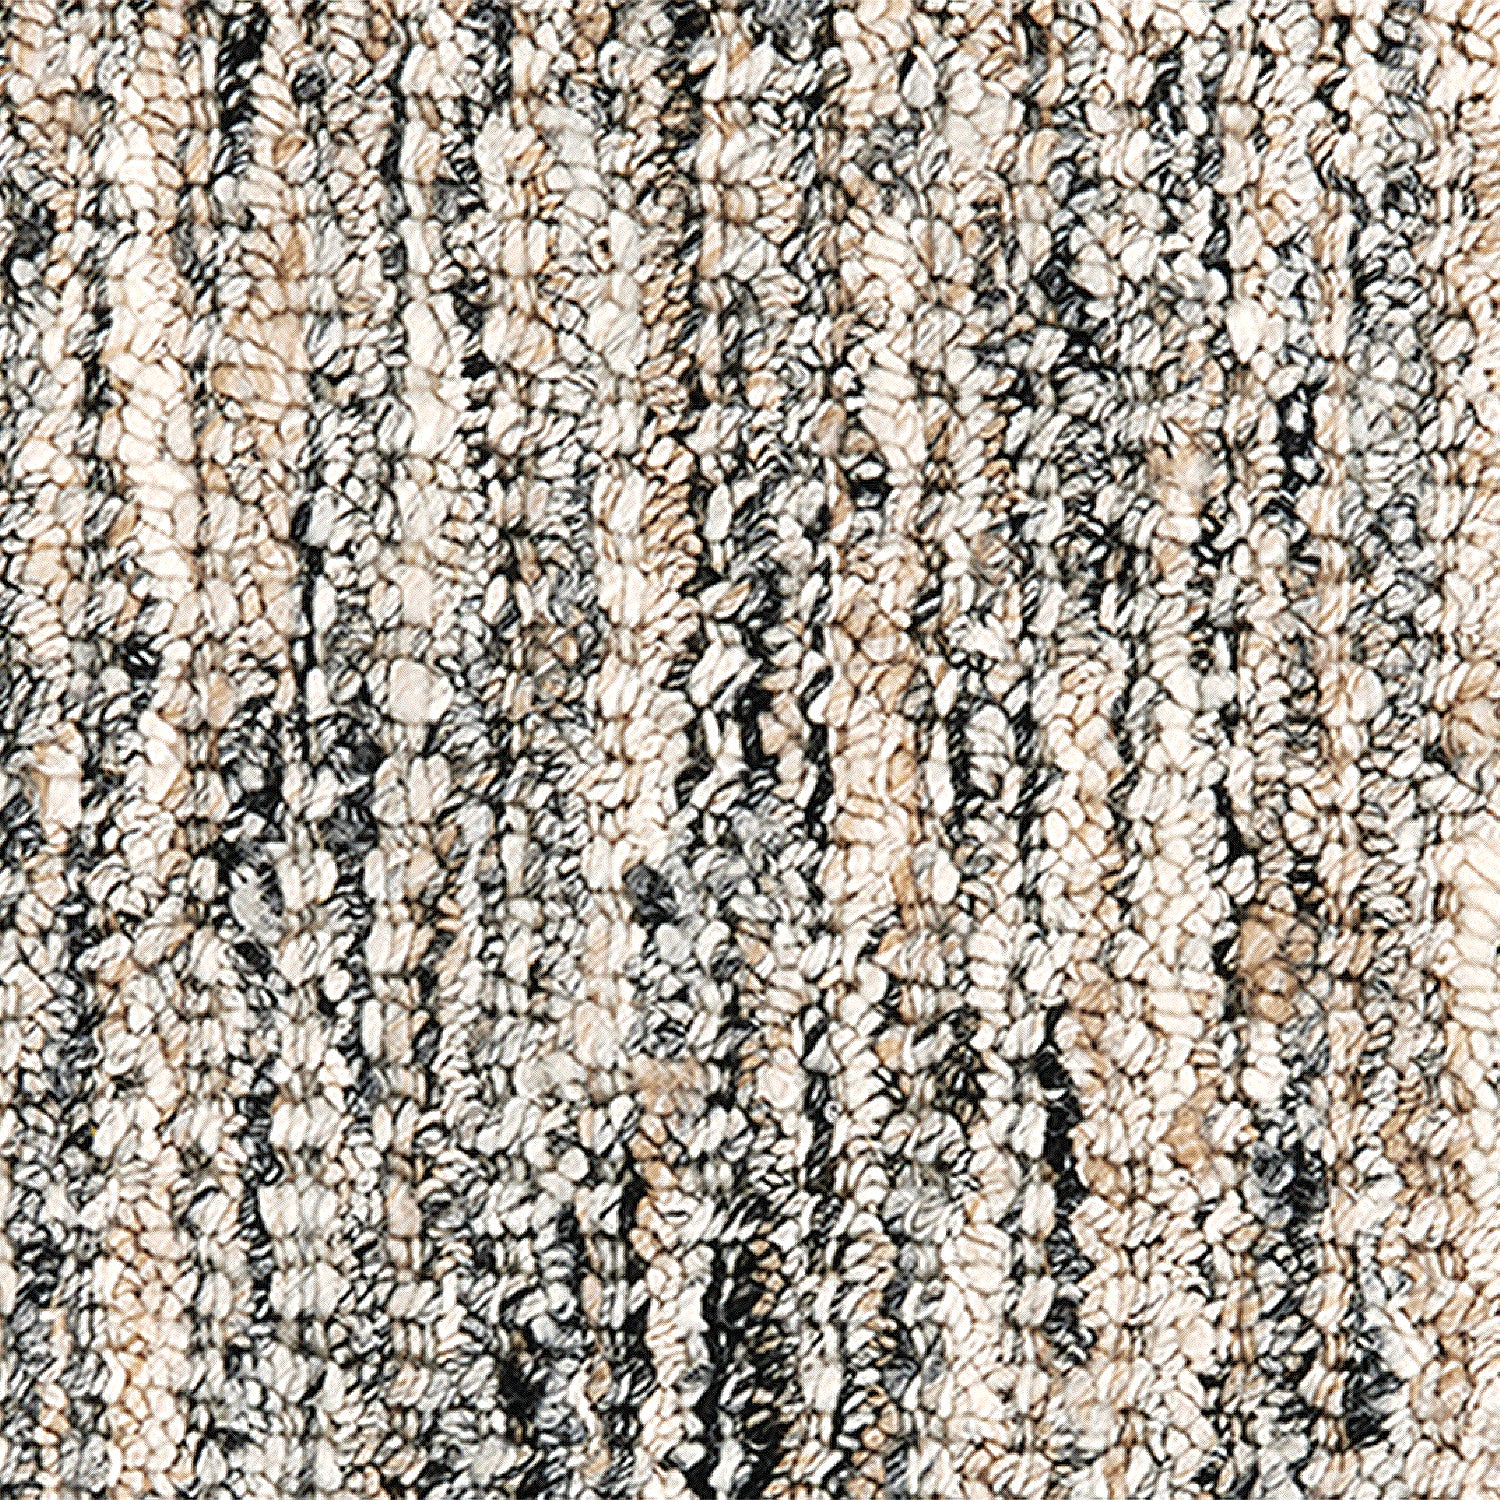 Wool-polyester broadloom carpet swatch in a multicolor cream, tan and charcoal.